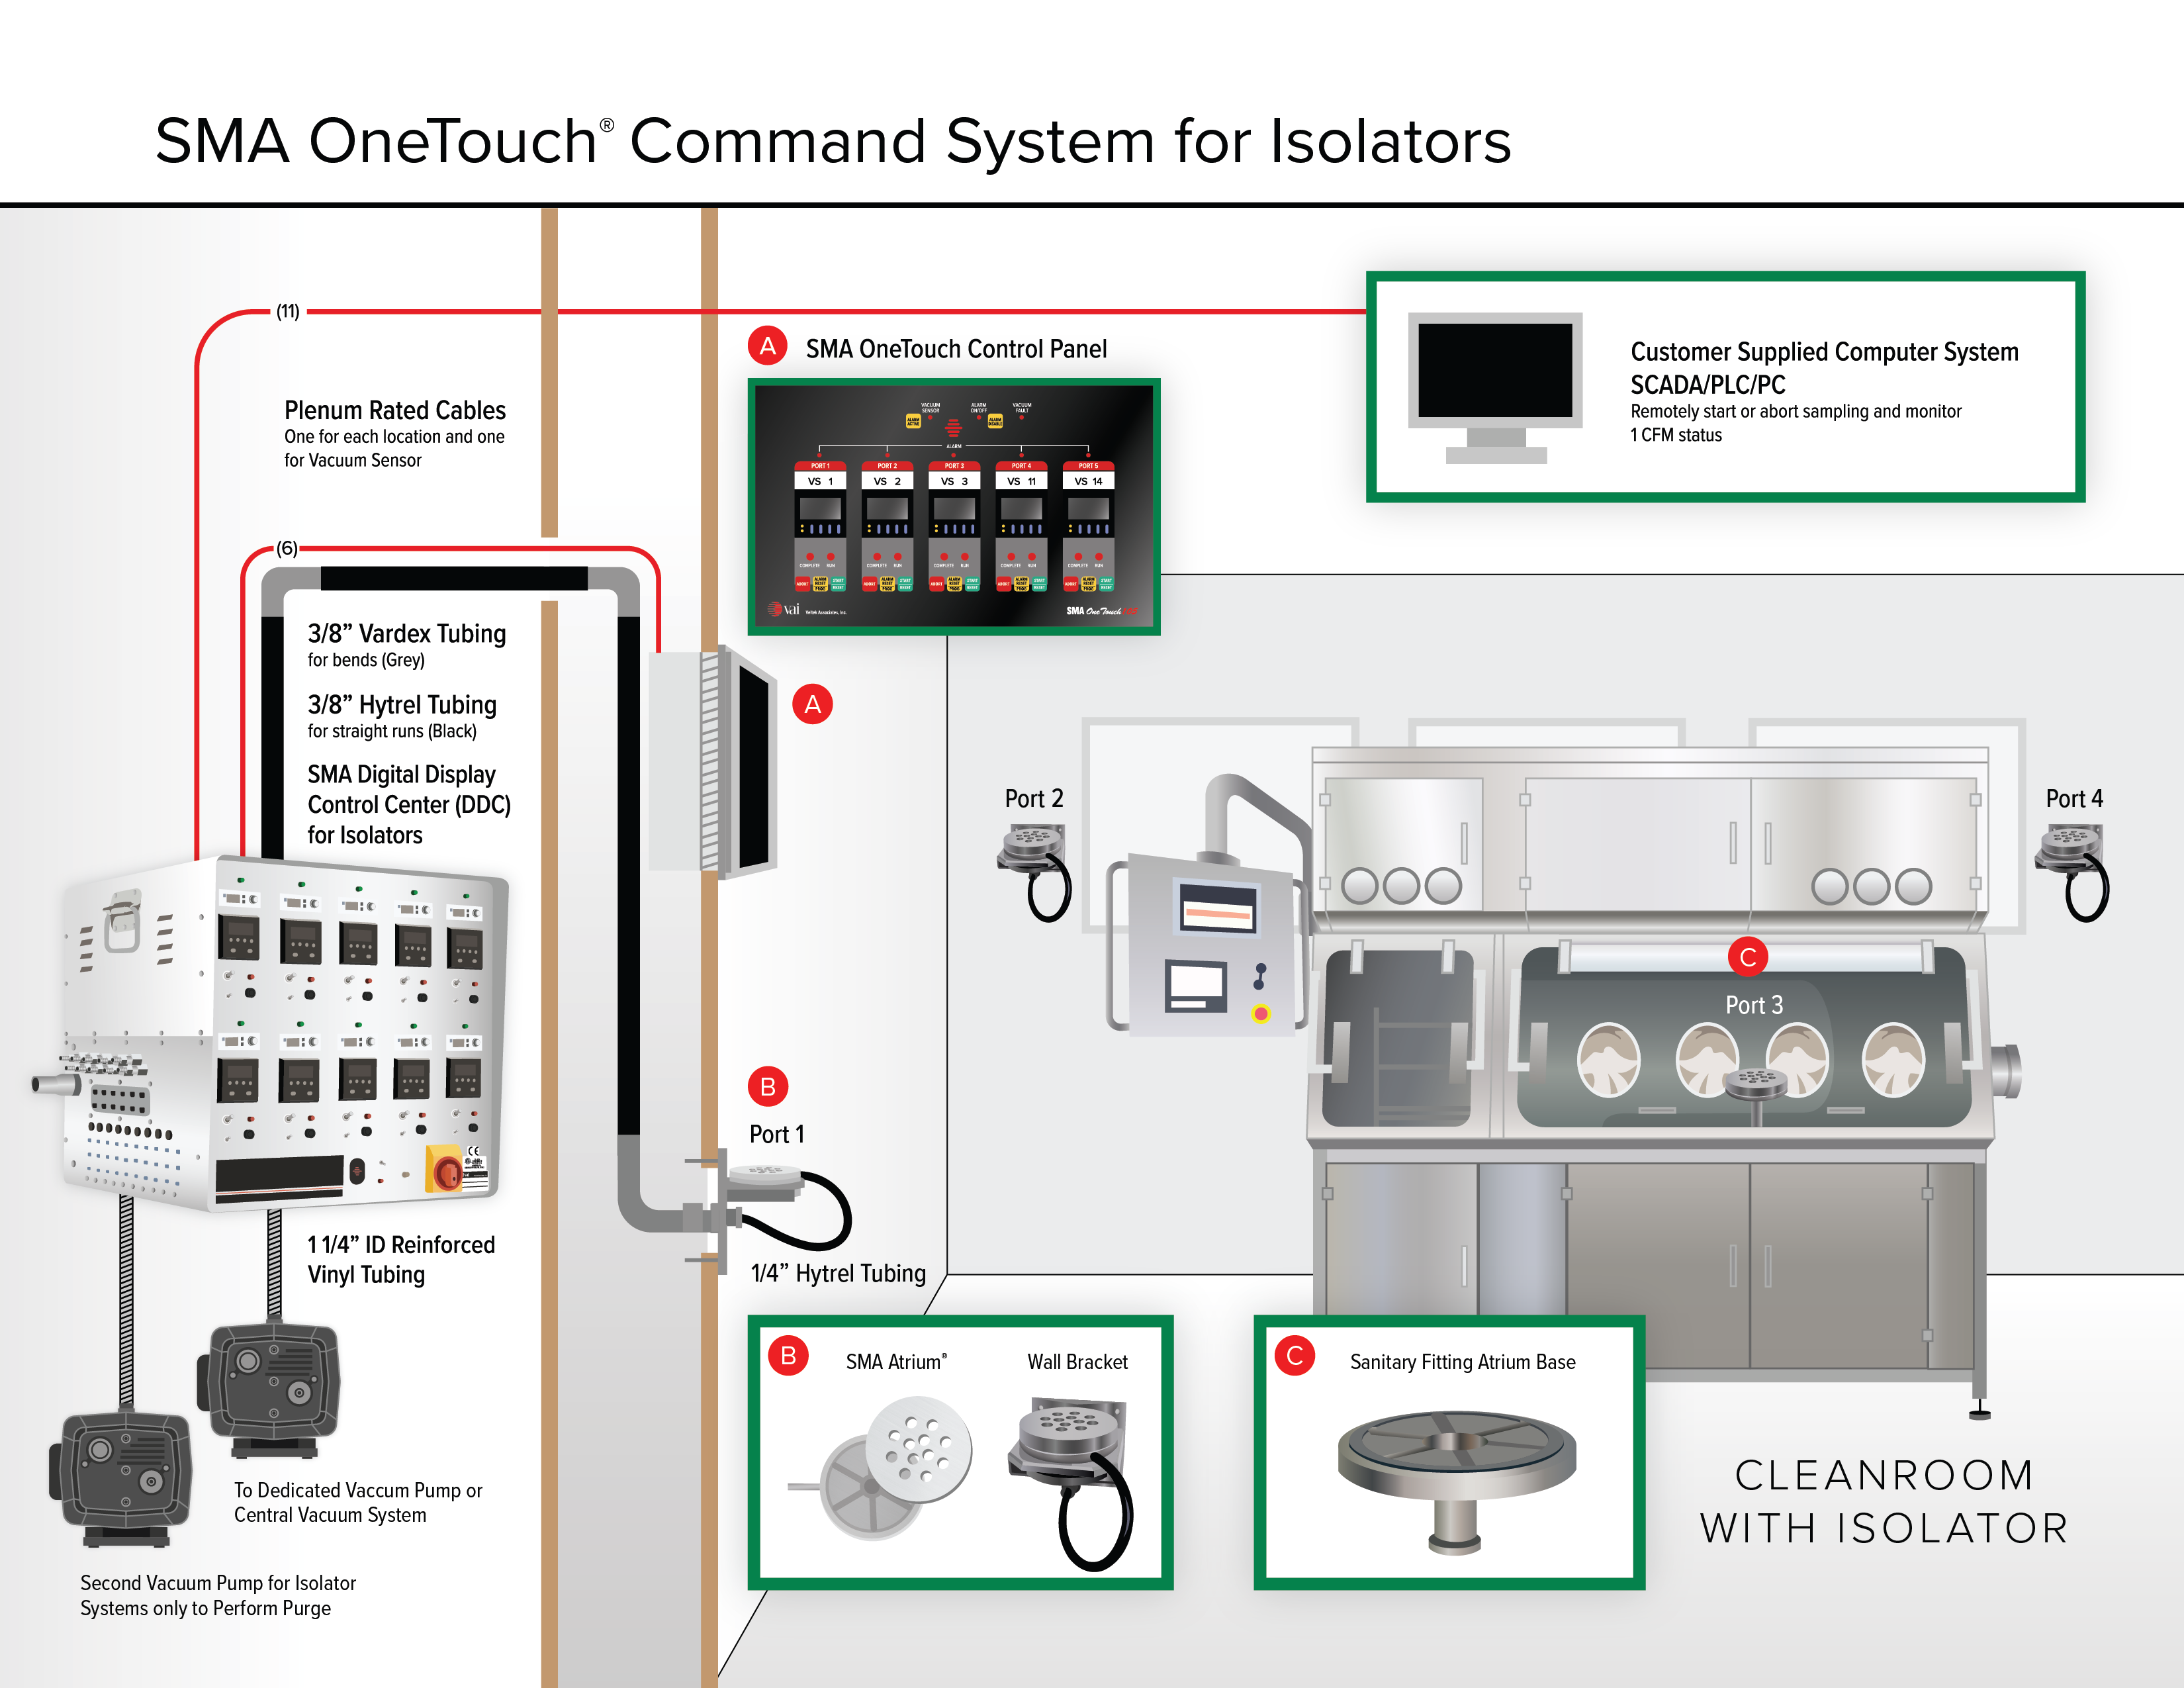 SMA OneTouch Command System for Isolators